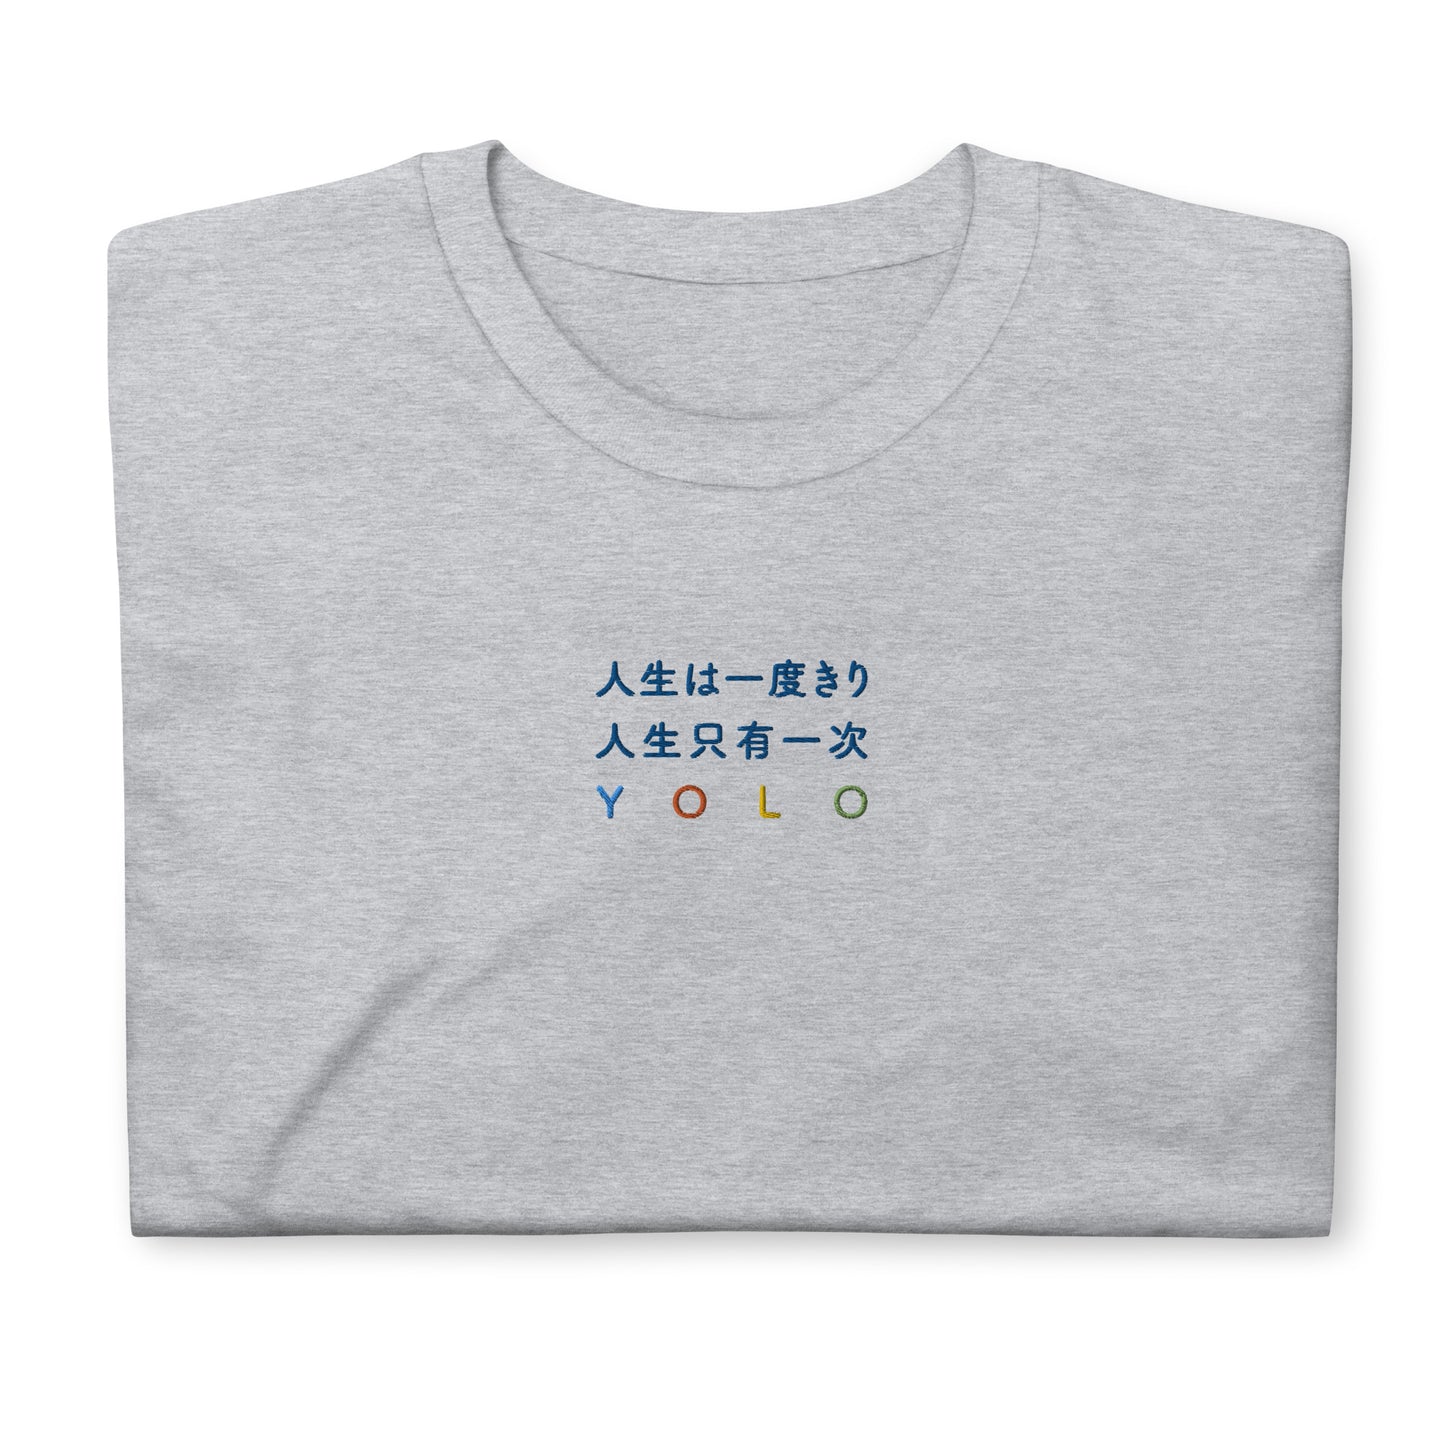 Light Gray High Quality Tee - Front Design with an Navy, Light Blue, Orange, Yellow, Light Green Embroidery "YOLO" in Japanese,Chinese and English